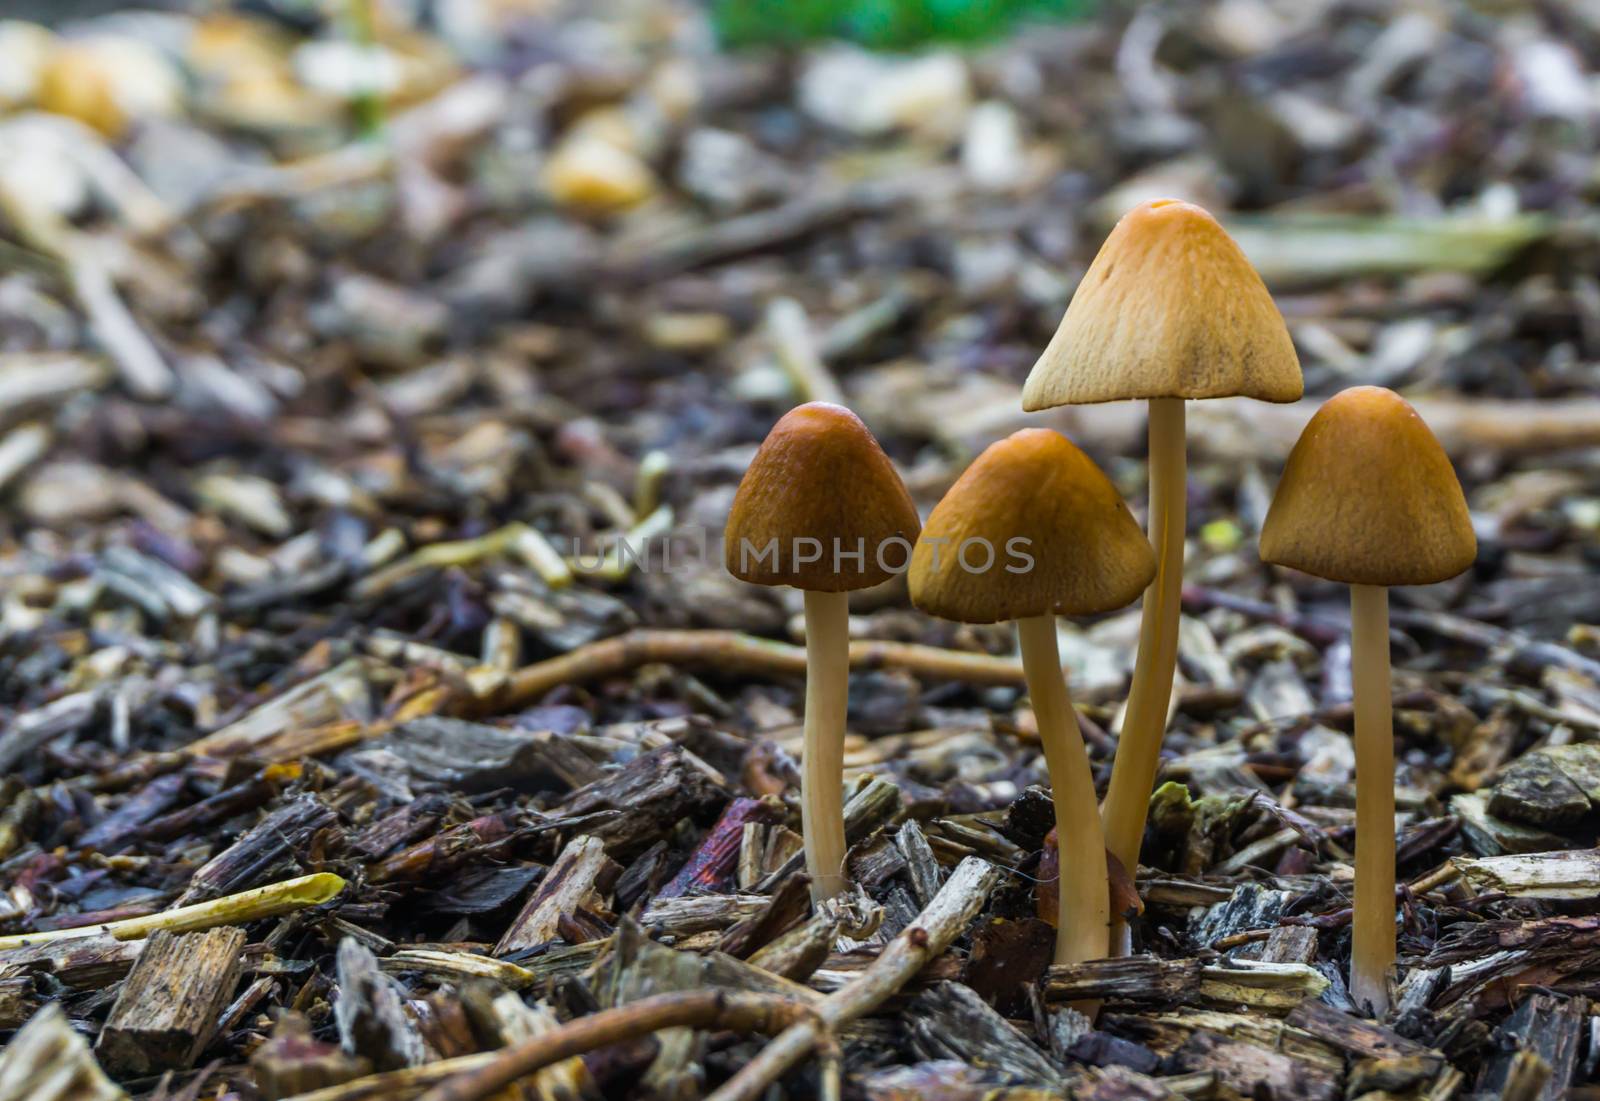 group of white dunce cap mushrooms with bell-shaped caps growing in the forest natural autumn season background by charlottebleijenberg